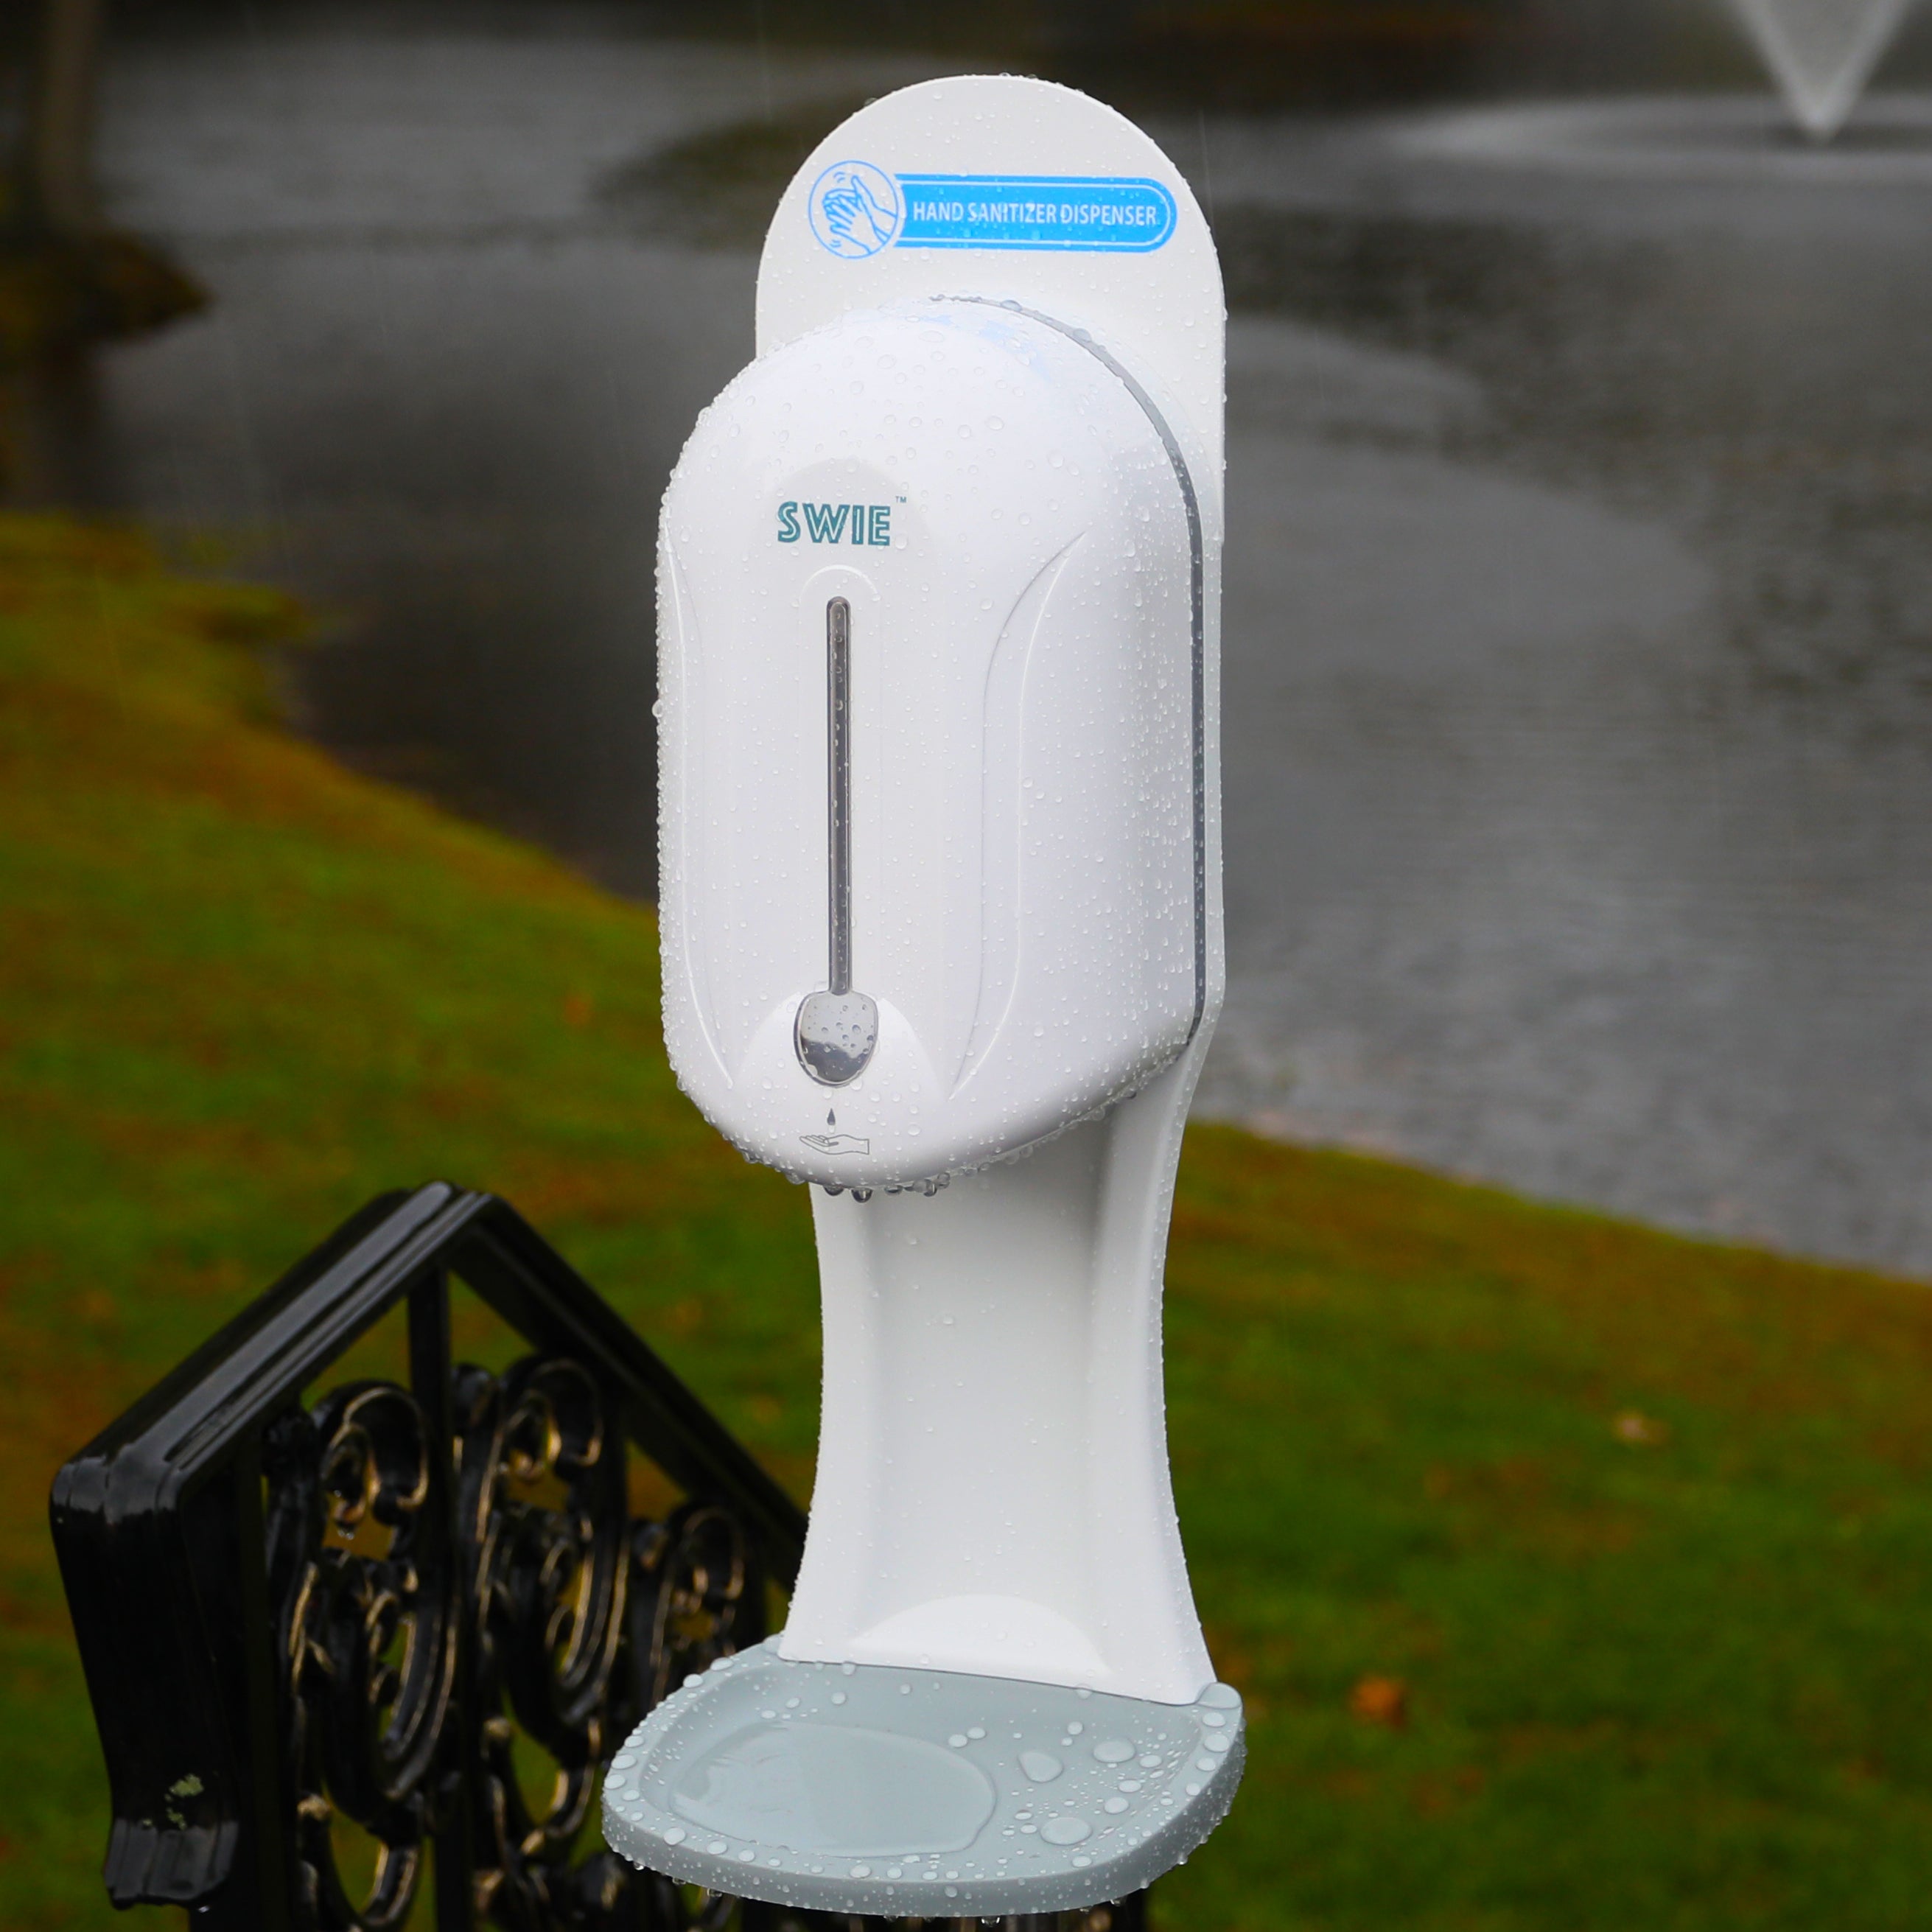 ALL-Weather Automatic Hand Sanitizer Station, Rain, Snow & Waterproof, Outdoor/Indoor